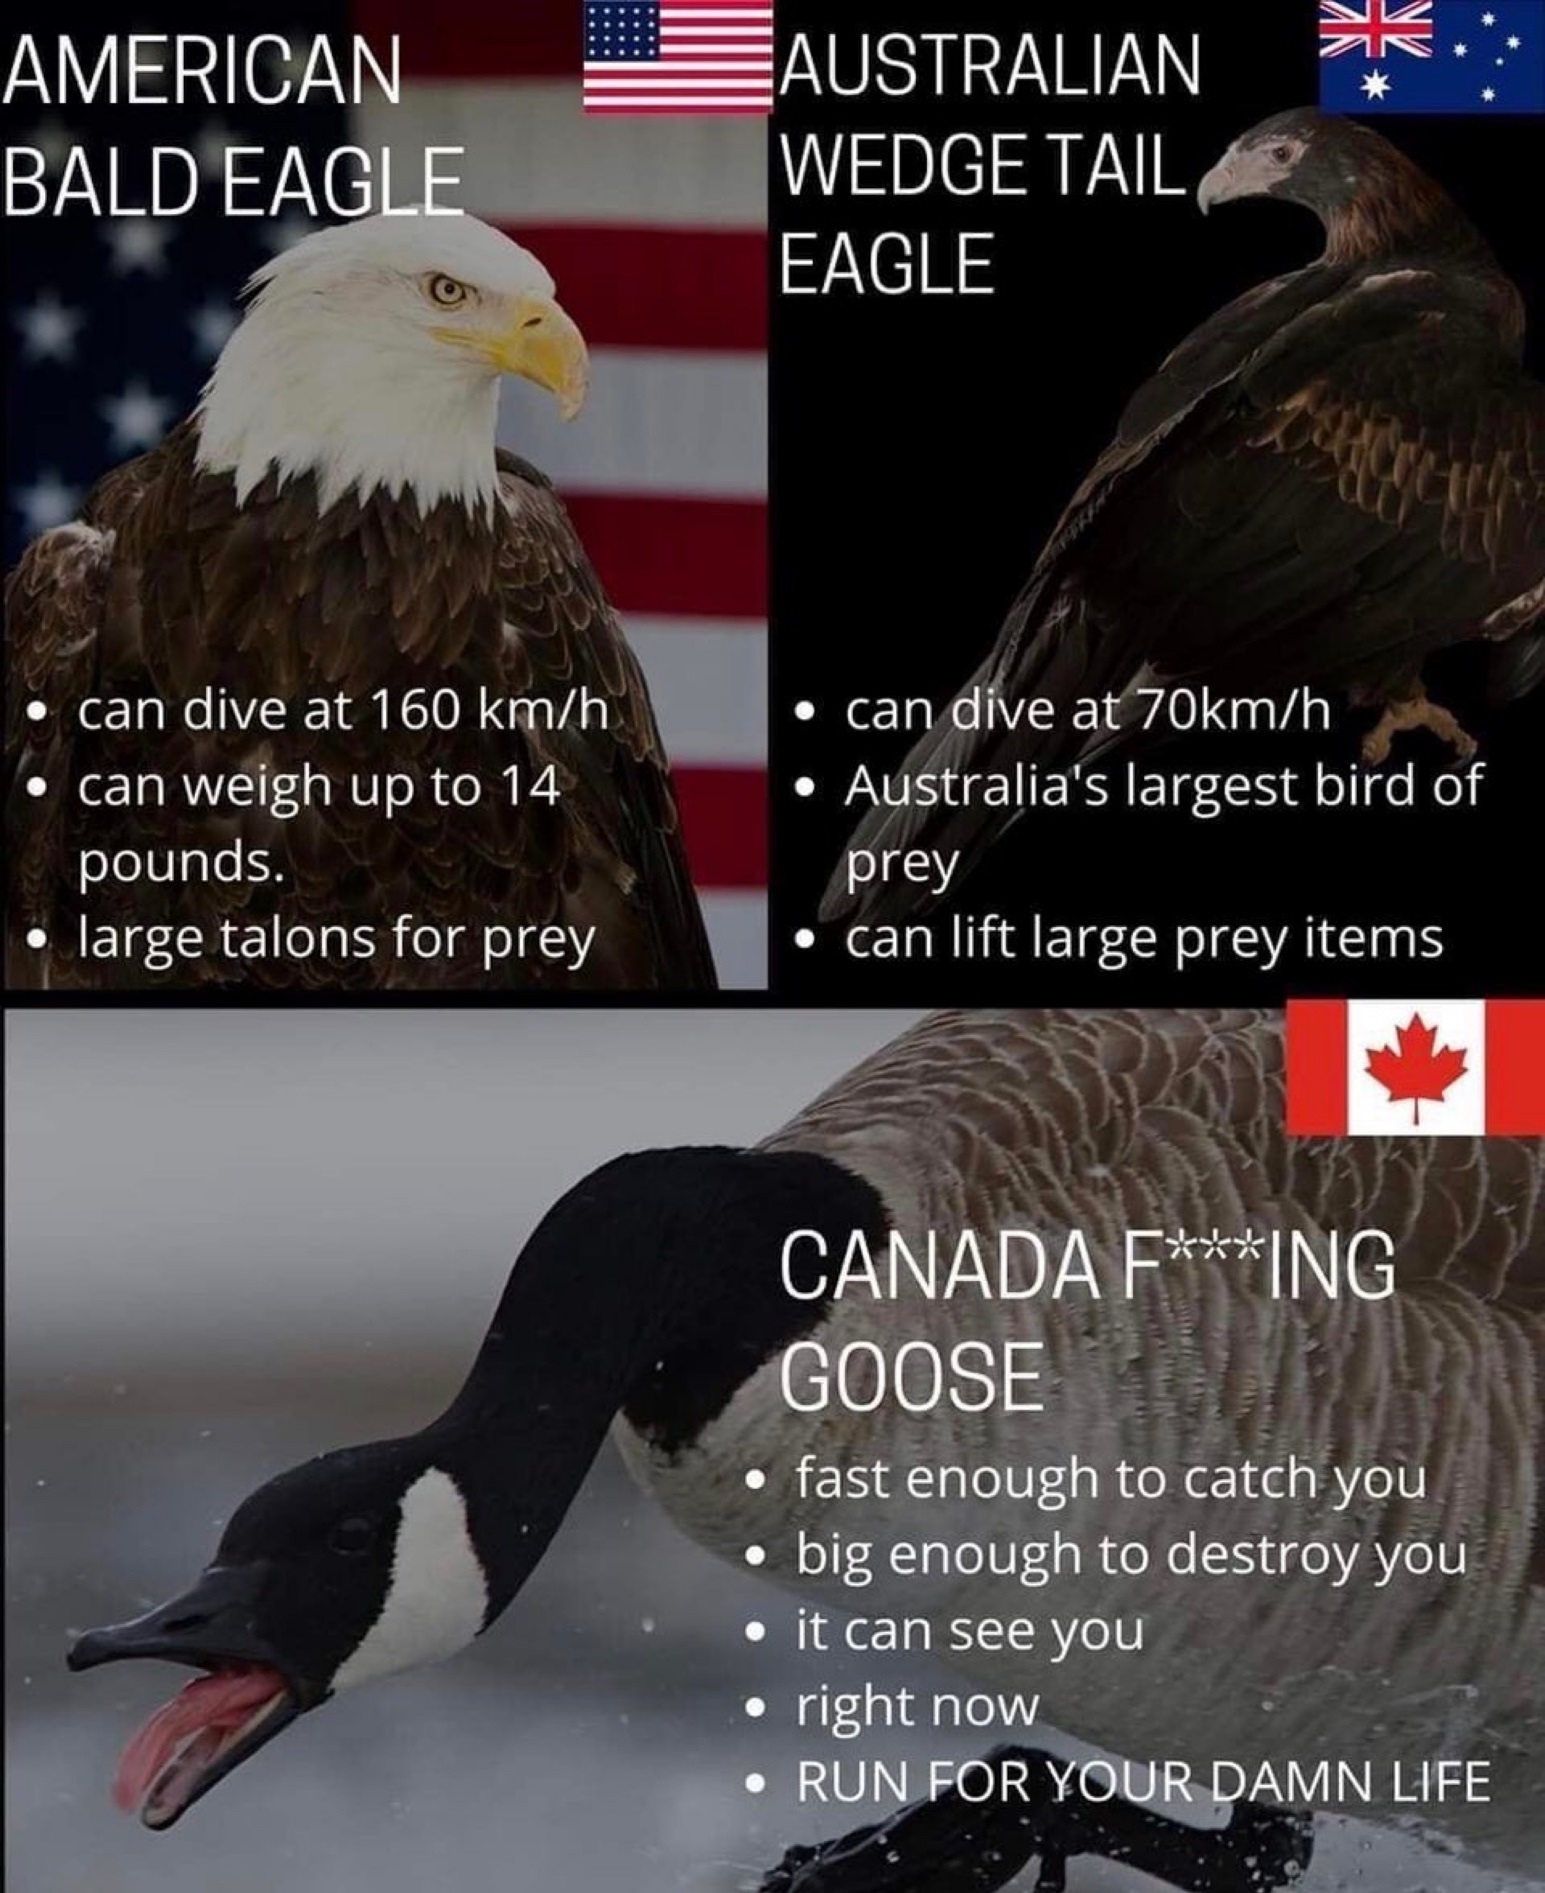 peace was never an option goose - Sc An American Bald Eagle Australian Wedge Tail Eagle can dive at 160 kmh can weigh up to 14 pounds. large talons for prey can dive at 70kmh Australia's largest bird of prey can lift large prey items Canada FIng Goose fas